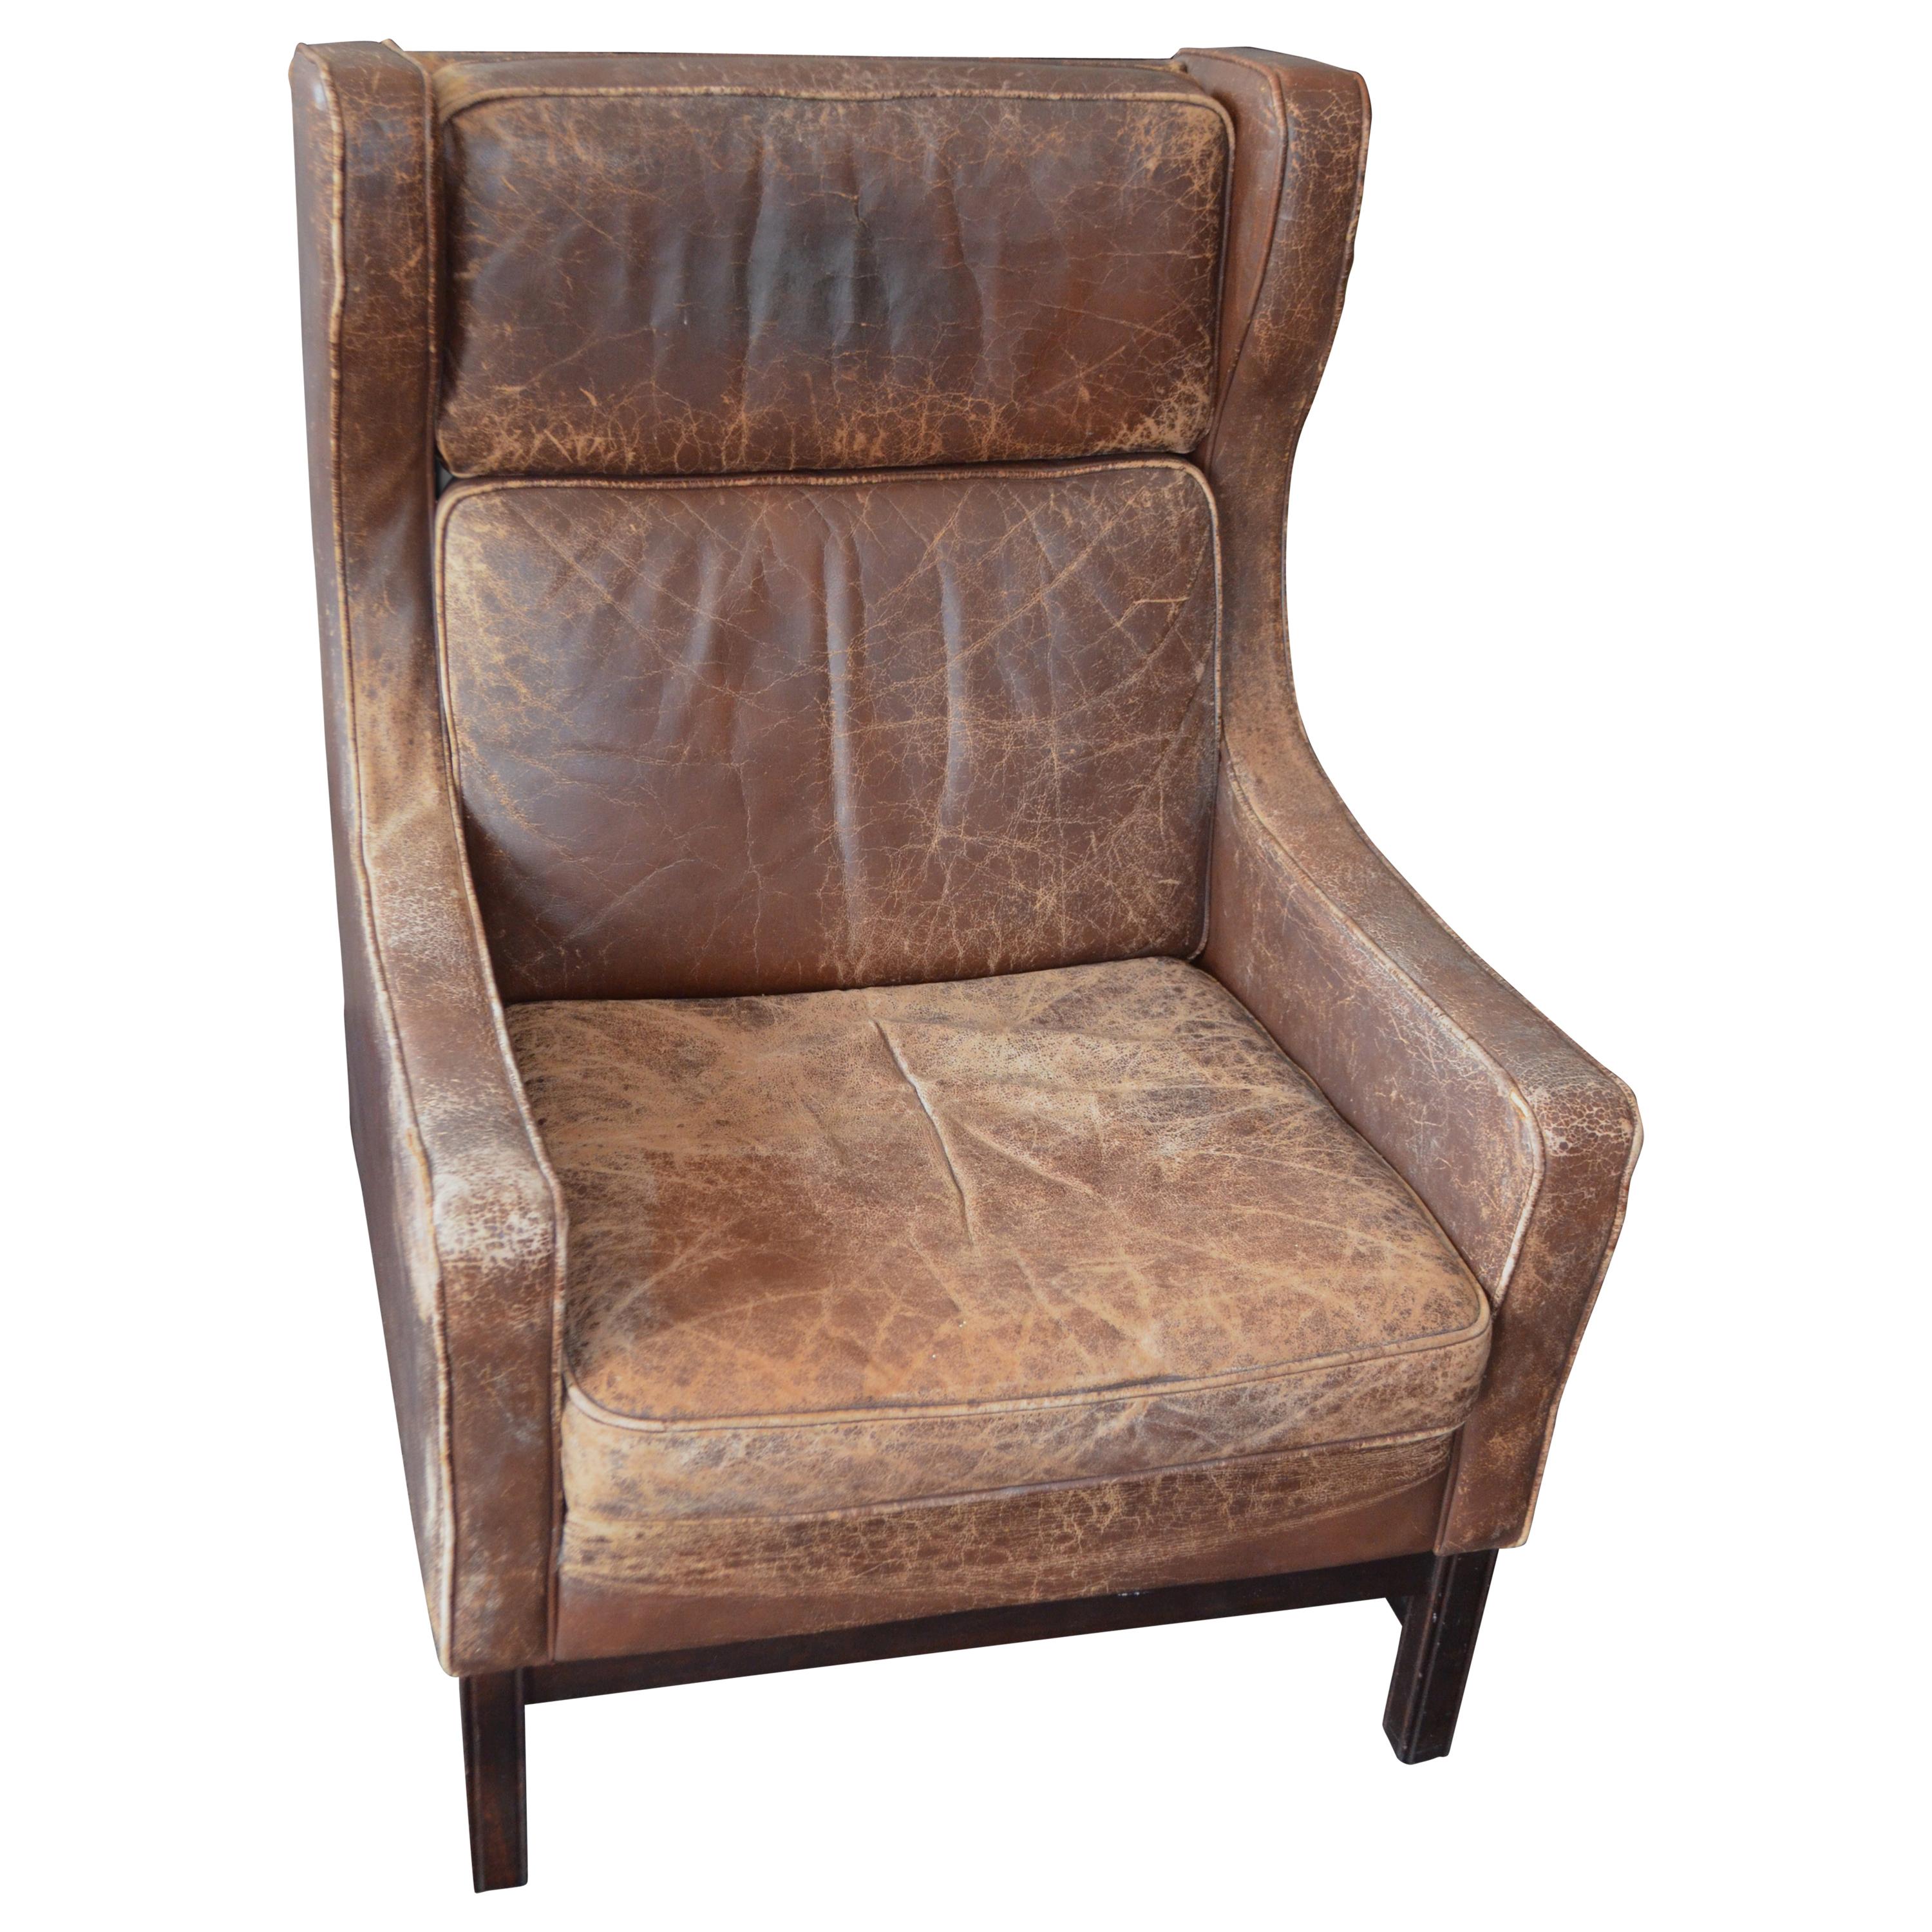 Club Chair of Worn Leather from Edwardian England, Wingback, Early 20th Century For Sale